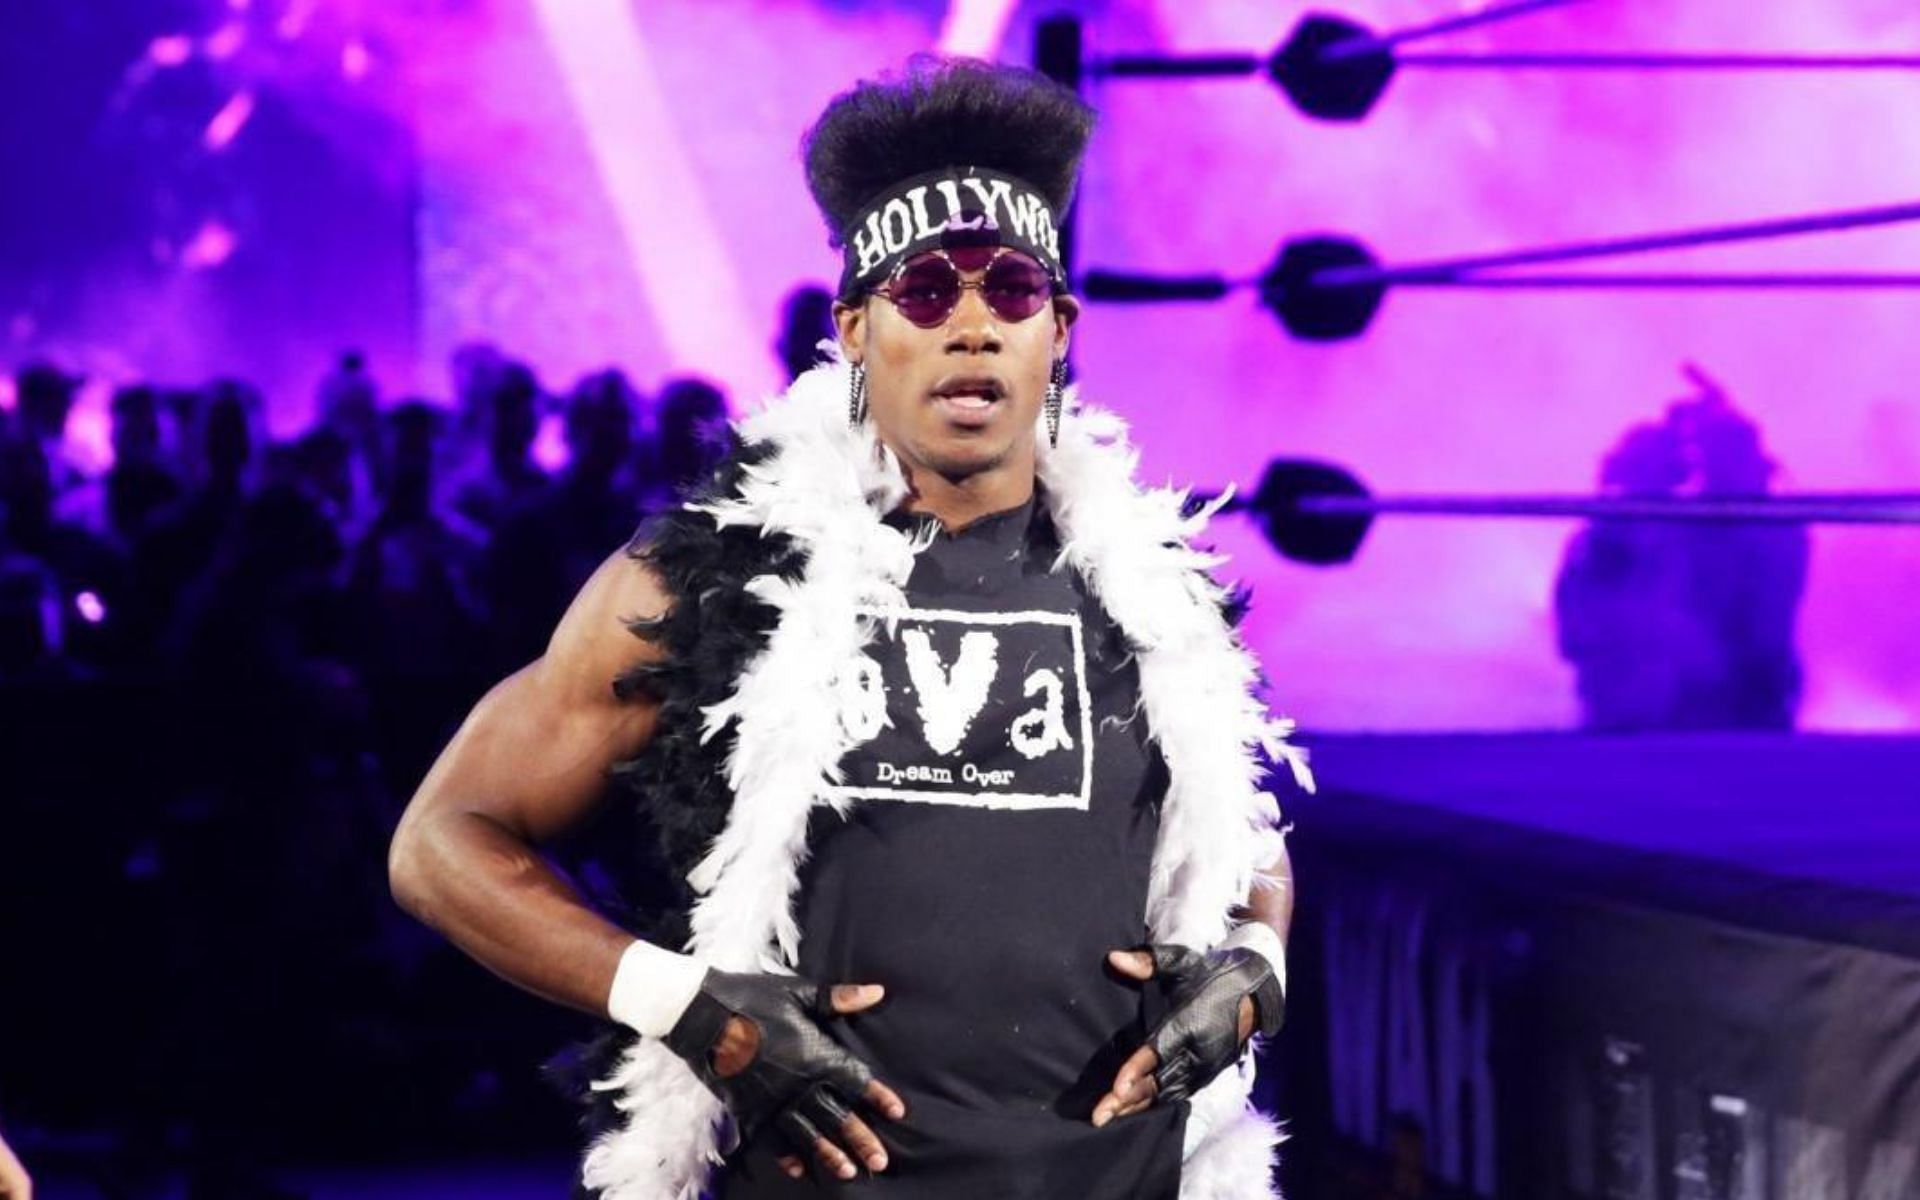 Velveteen Dream is former NXT North American Champion!